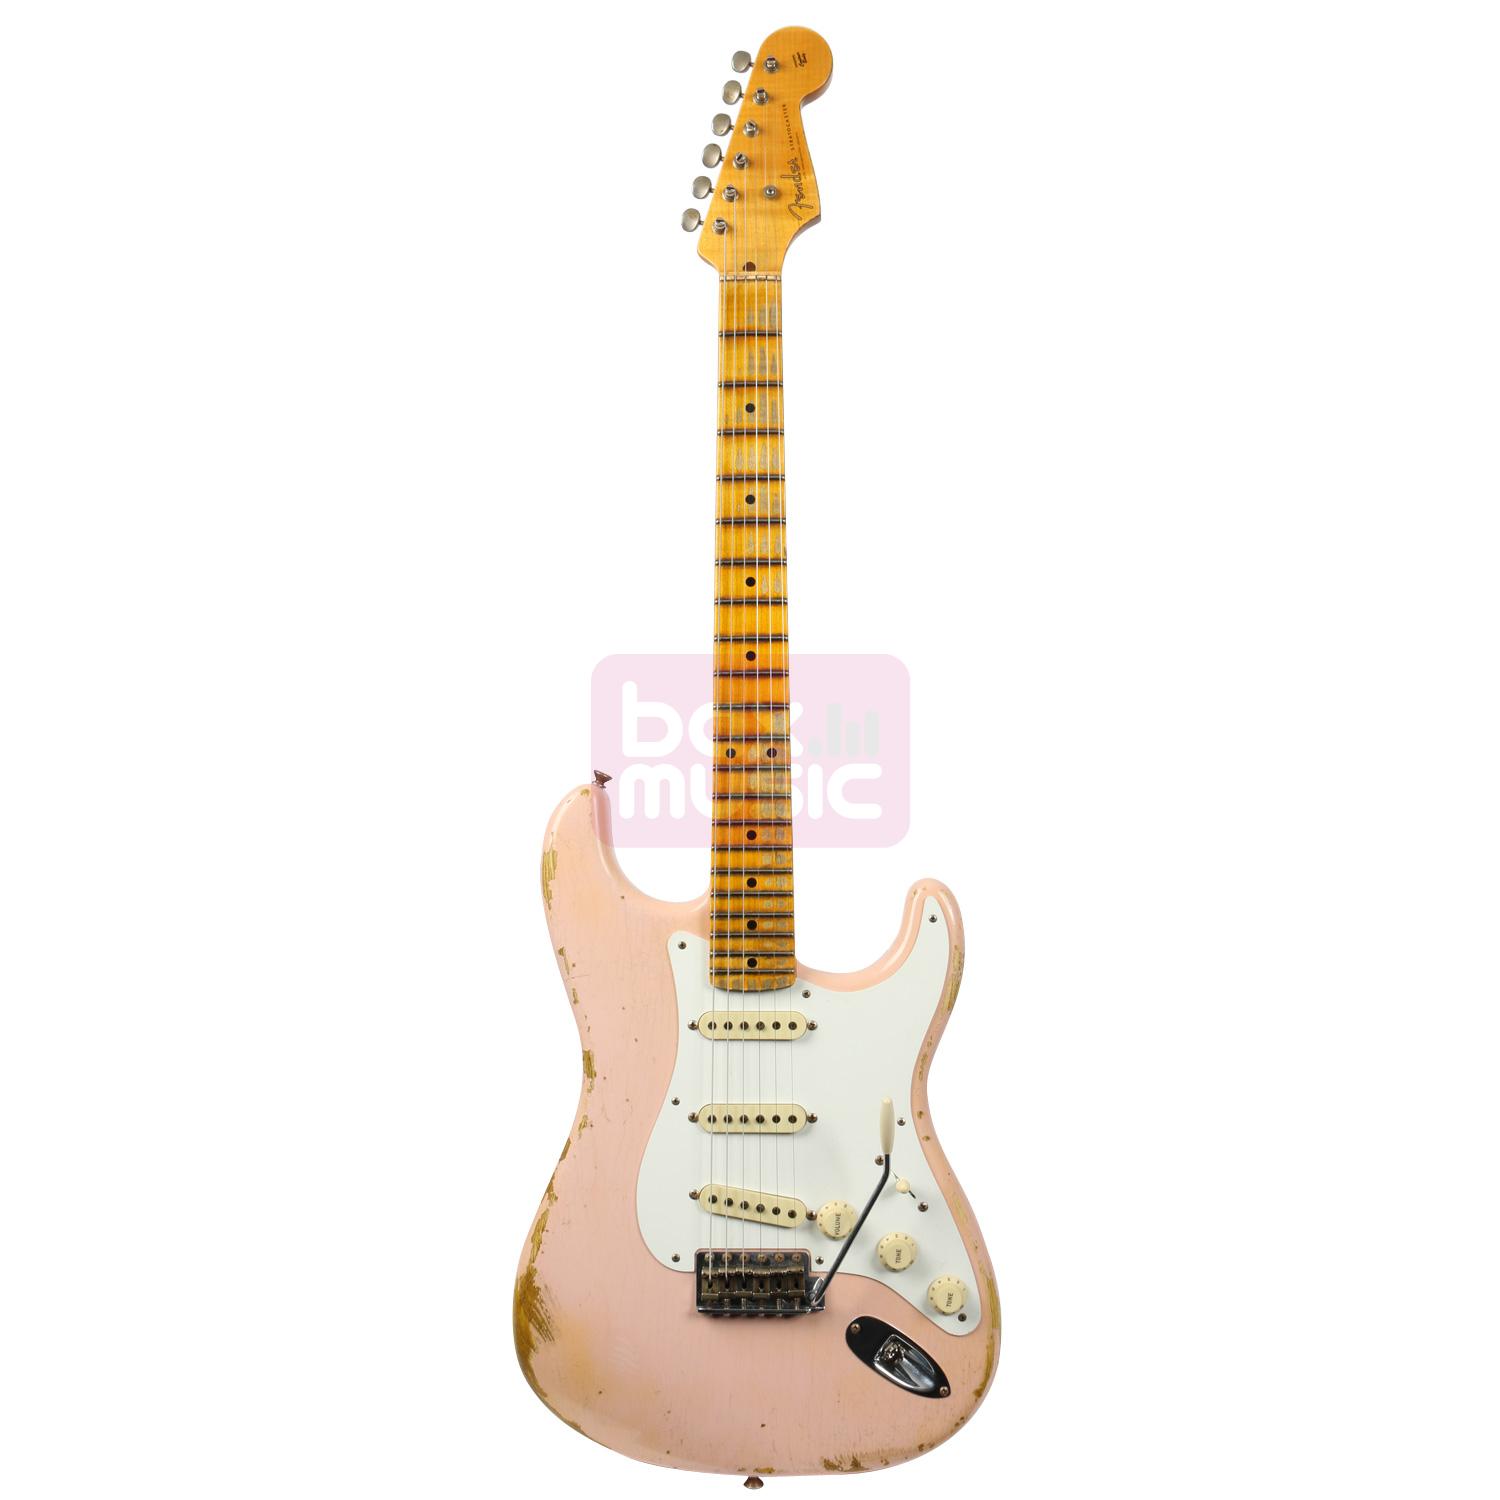 Fender Custom Shop Limited 1956 Relic Strat Faded Shell Pink